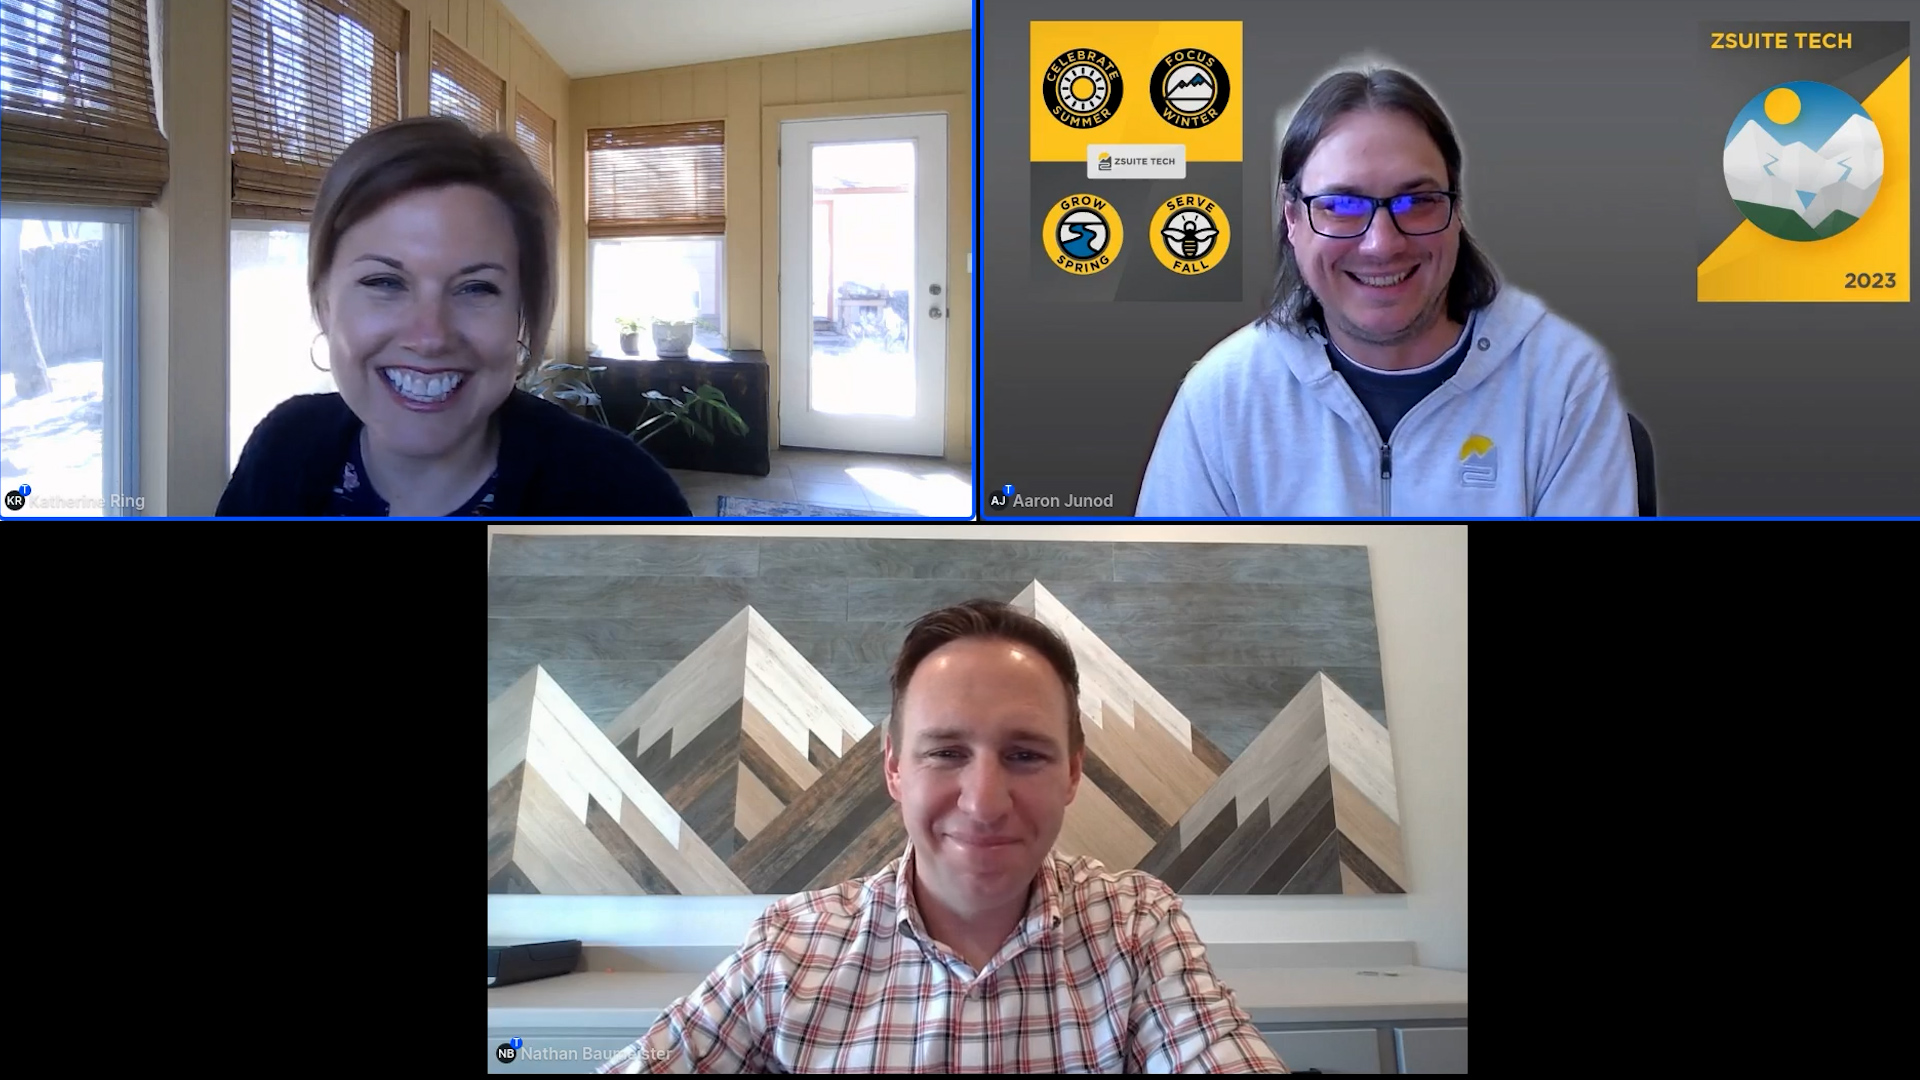 ZSuite CEO Nathan Baumeister, VP of Marketing Katherine Ring, and CTO Aaron Junod appearing on a video conference.